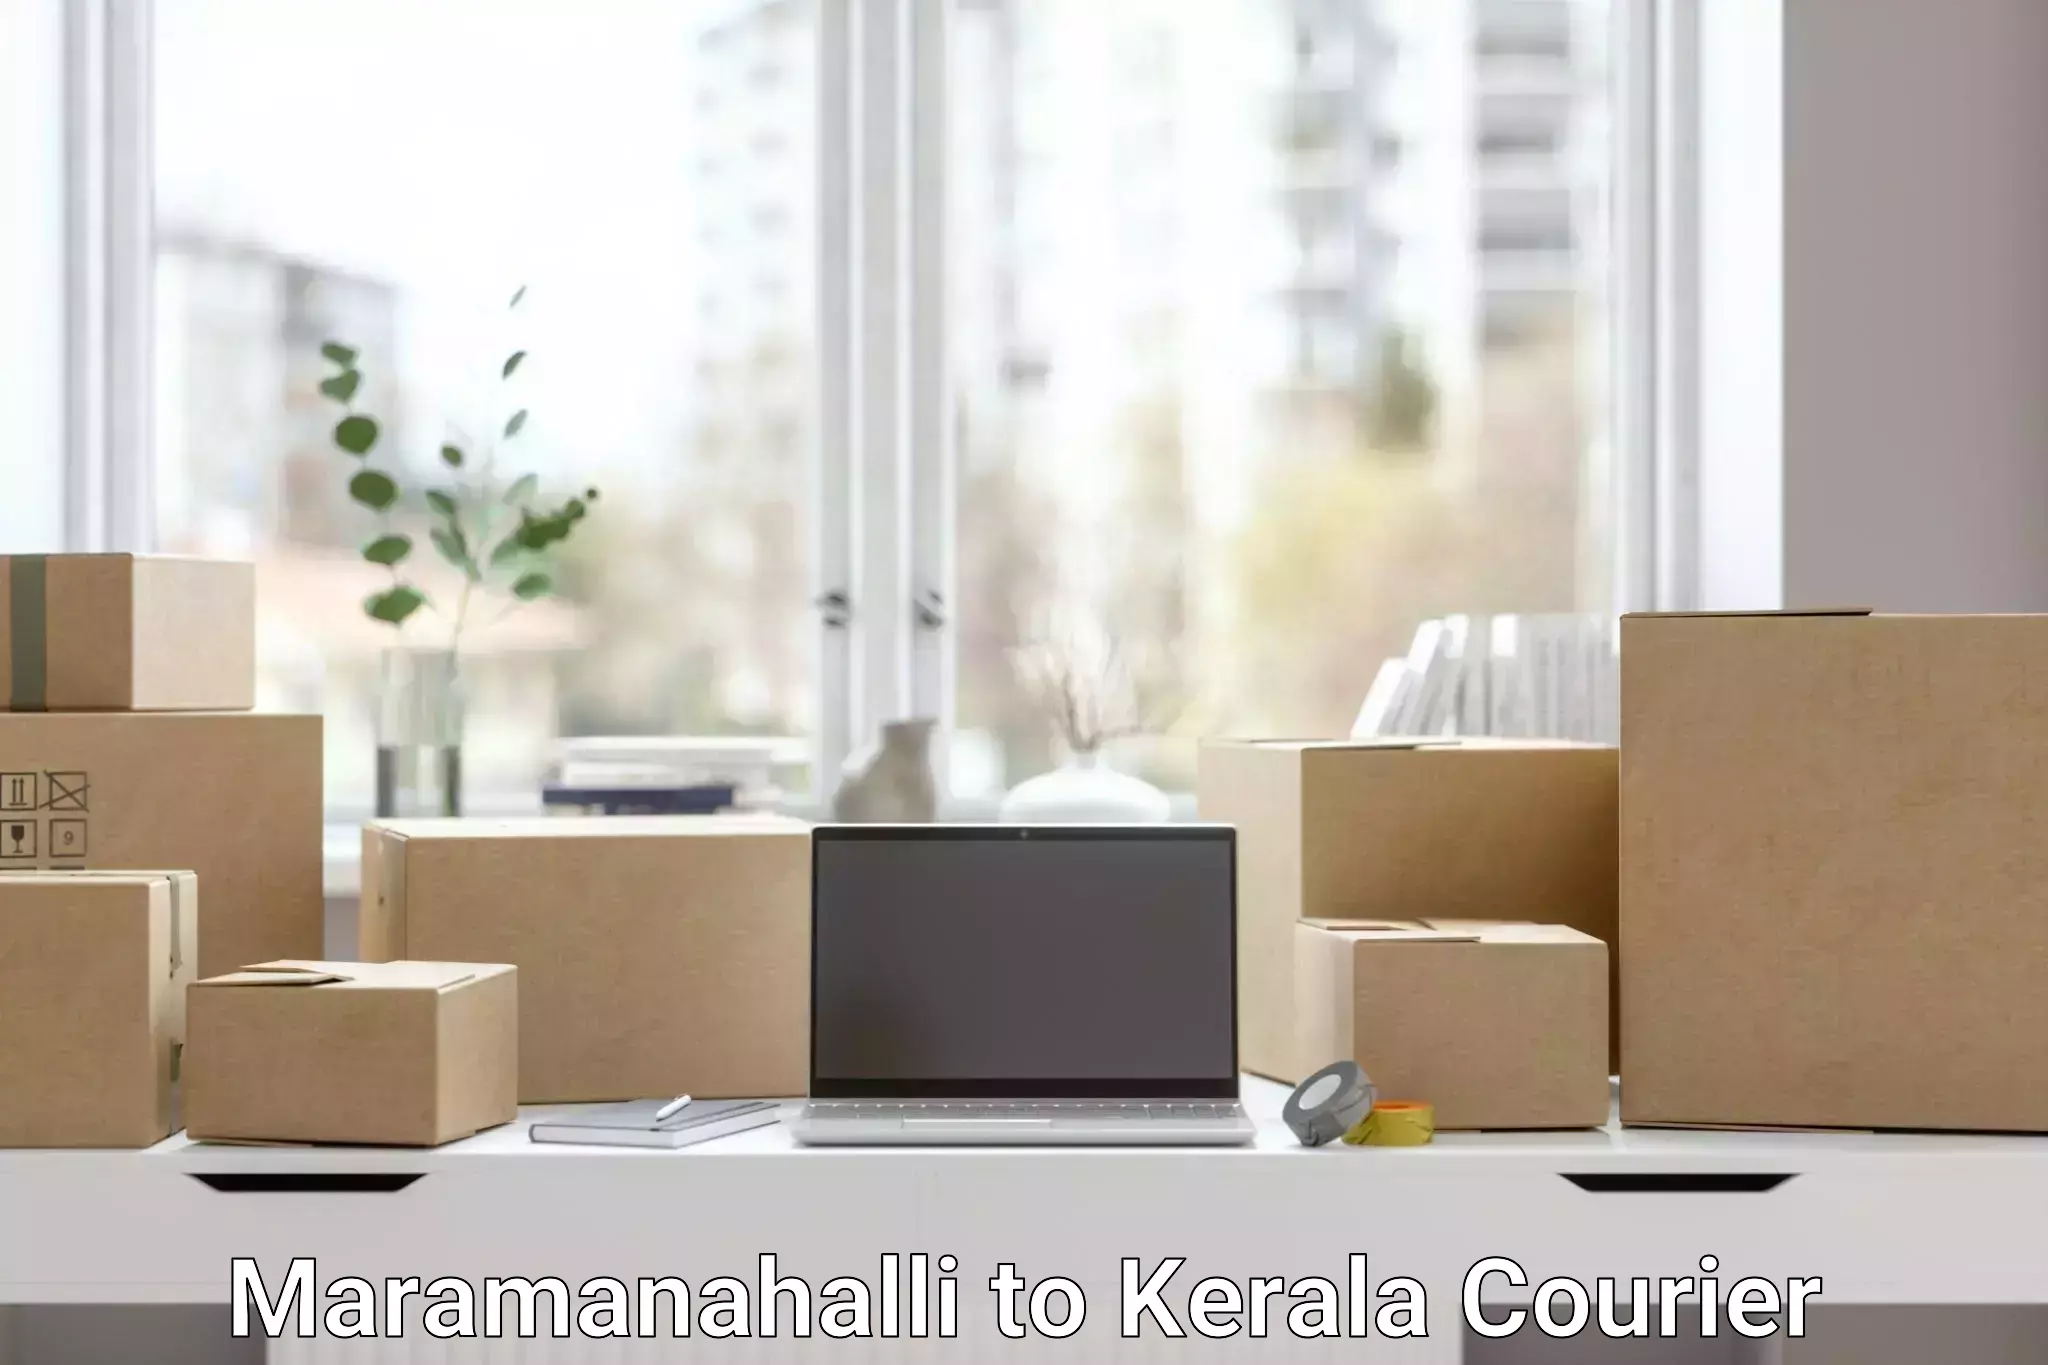 Residential courier service in Maramanahalli to Kerala